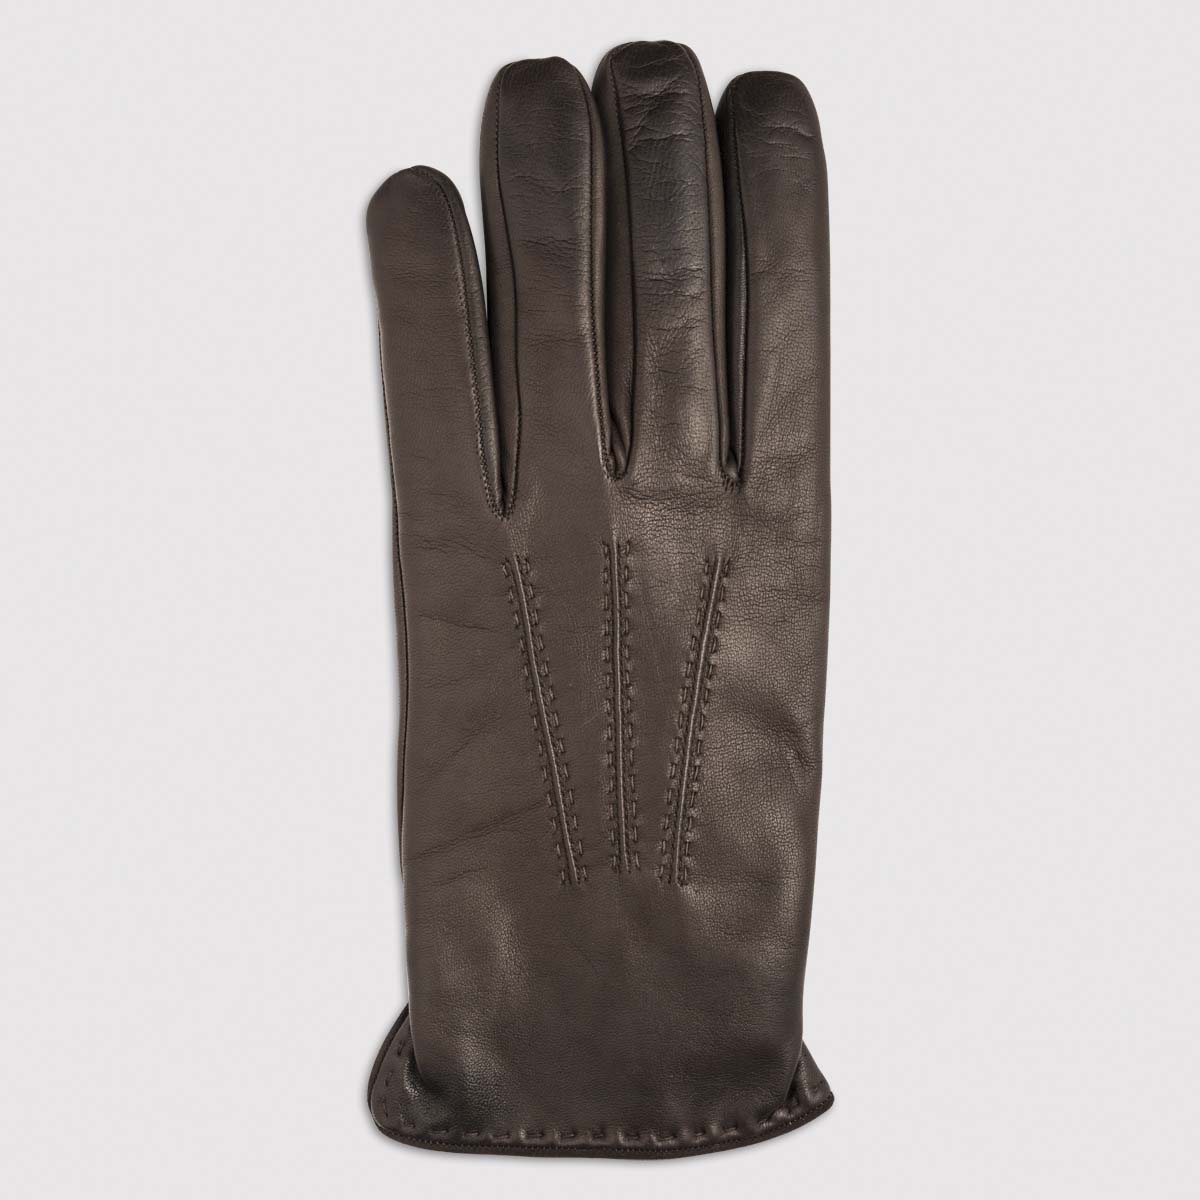 Nappa Leather Glove with Cashmere Lining in Mocca – 8.5